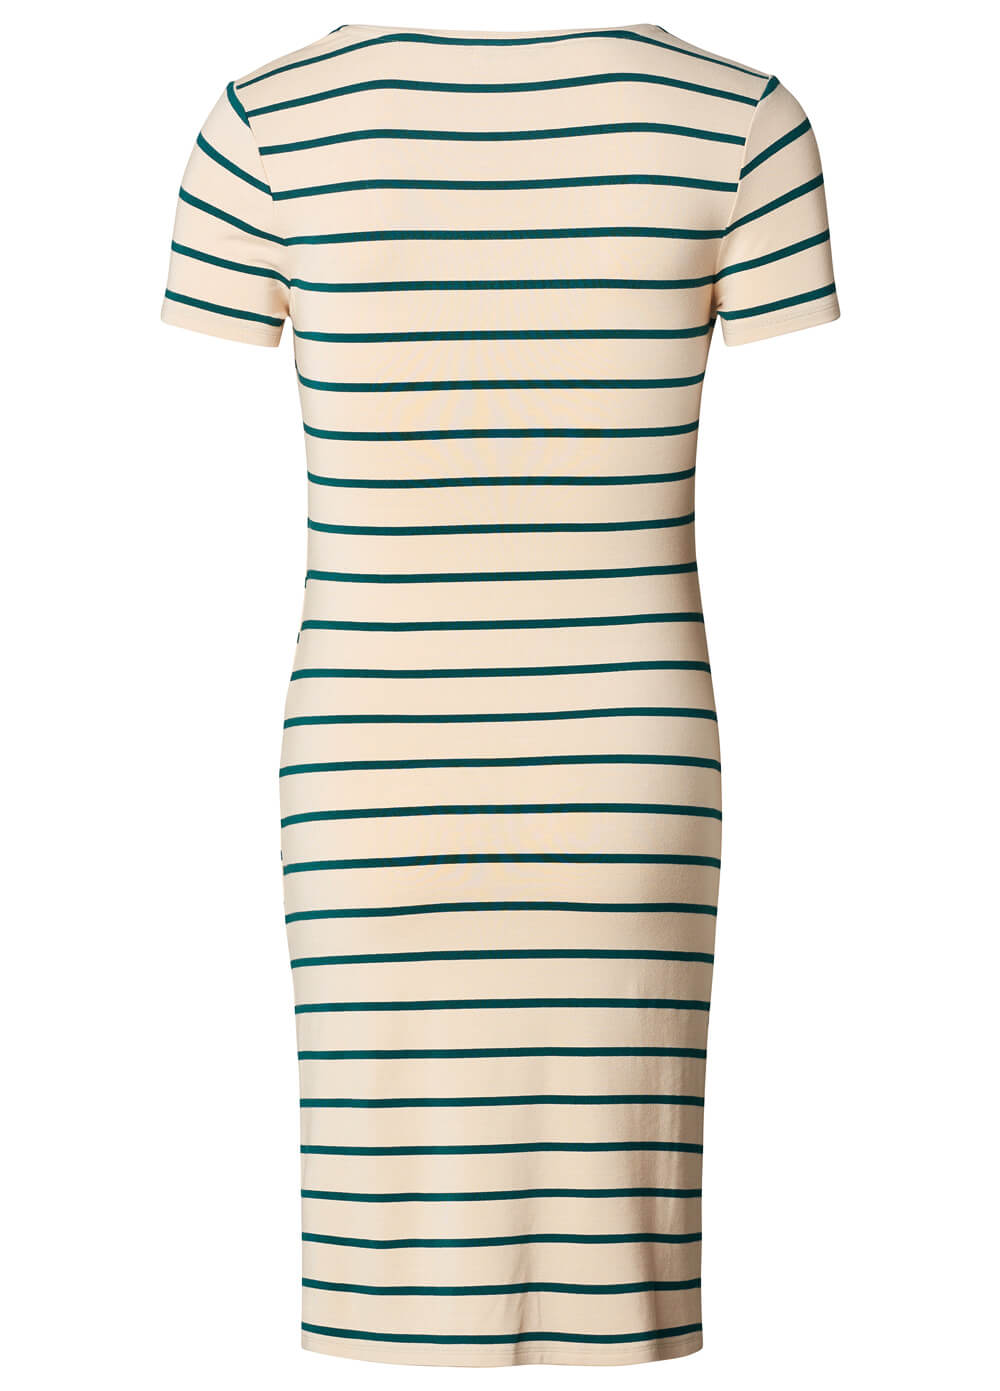 Lotus Maternity Dress in Green Stripes by Noppies